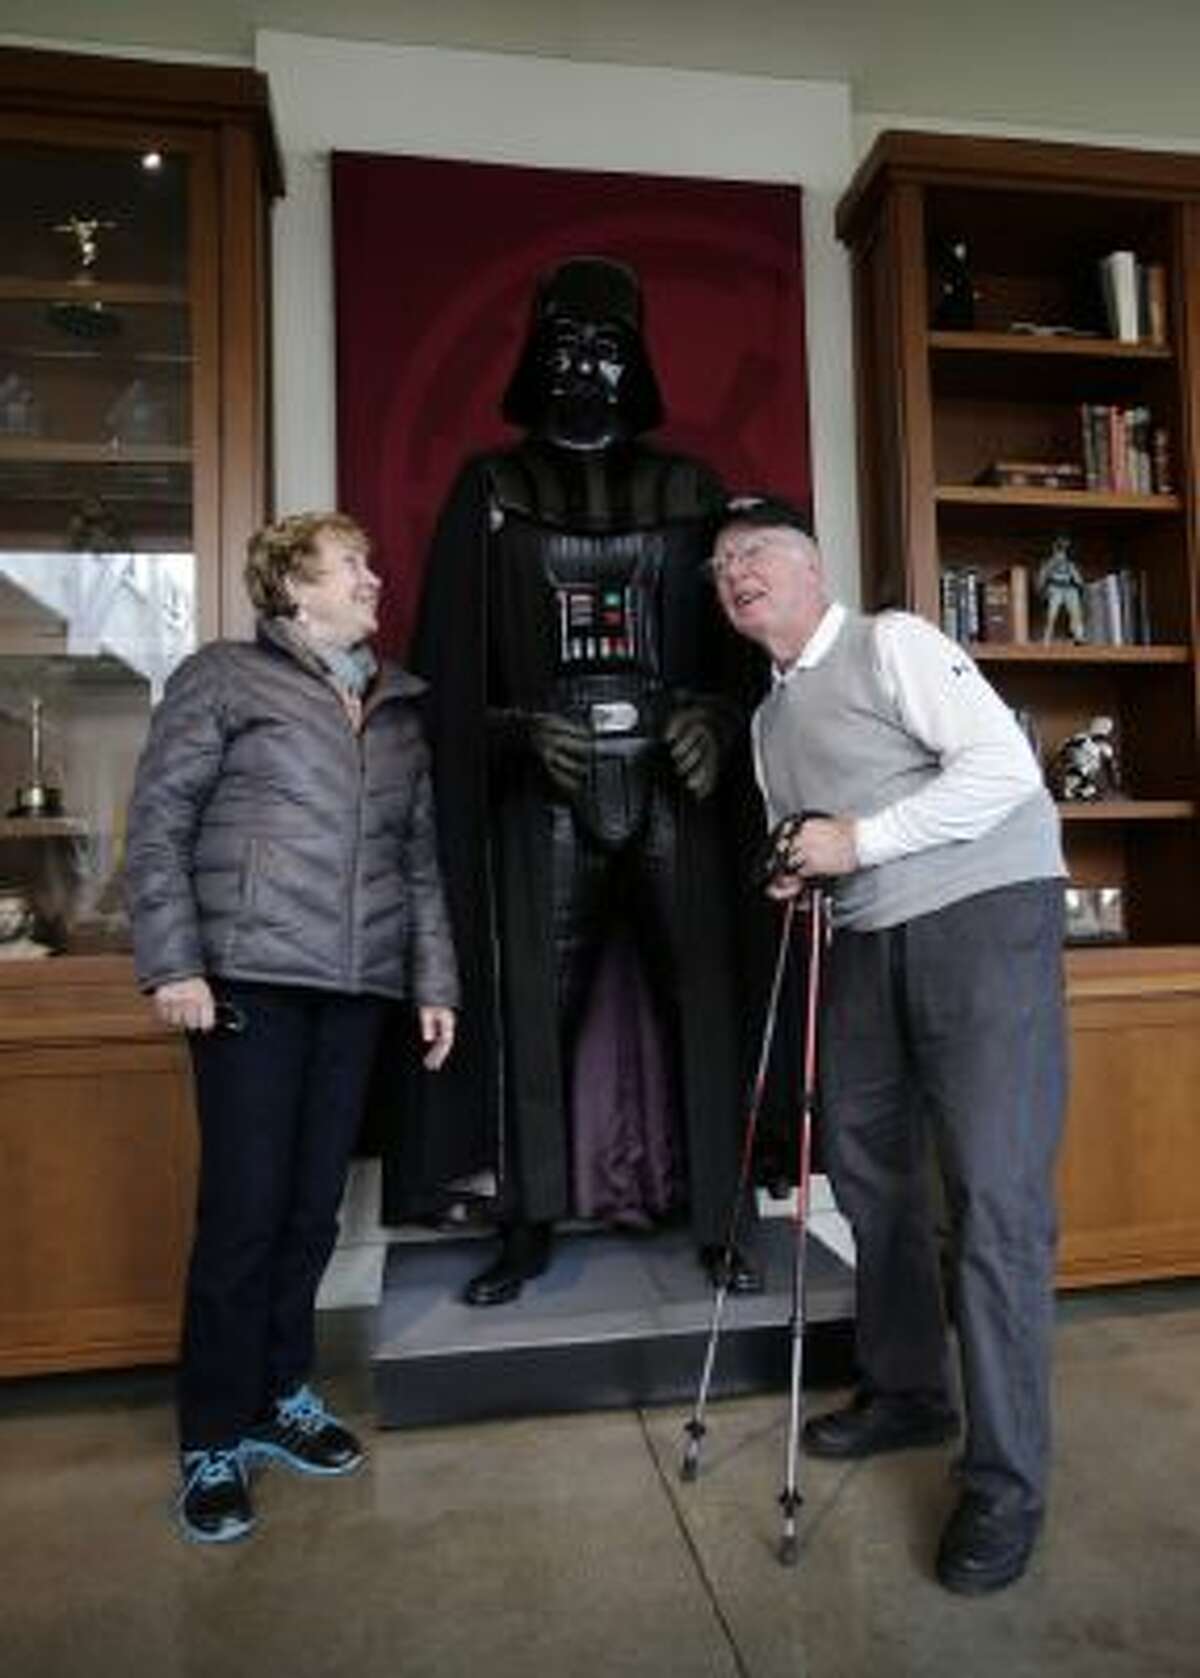 Paulette and Dan Cochrane of Walnut Creek pose with Darth Vader during a visit to the Letterman Digital Arts Center during a stop with the San Francisco Movie Tours bus tour in San Francisco, Calif. on Monday, Feb. 3, 2014. The Letterman Digital Arts Center is home of Lucasfilm in the Presidio.